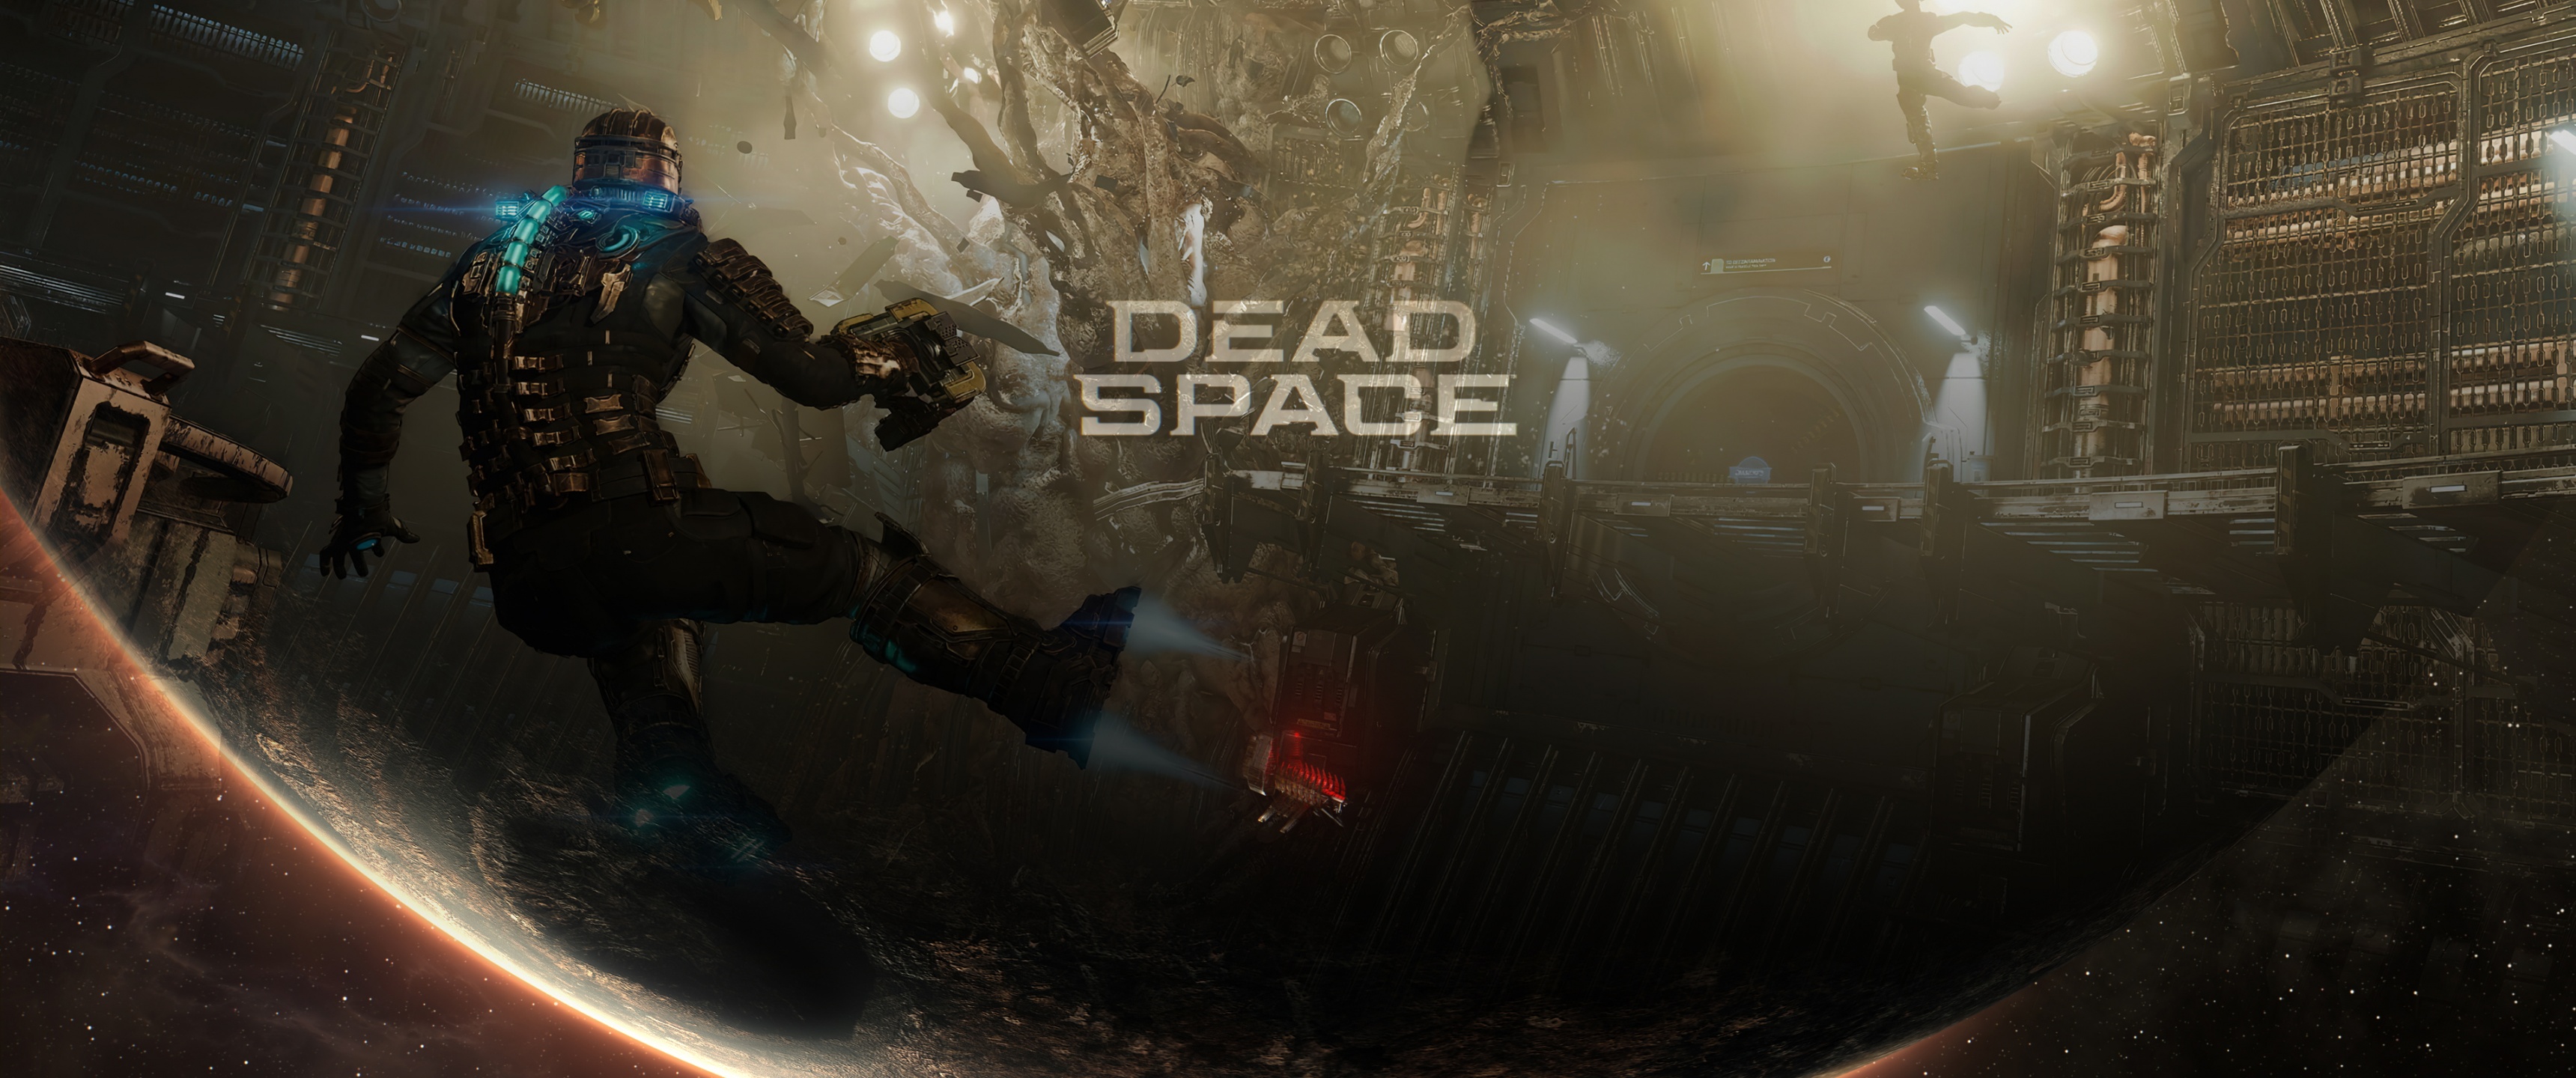 Deadspace Wallpaper 81 pictures